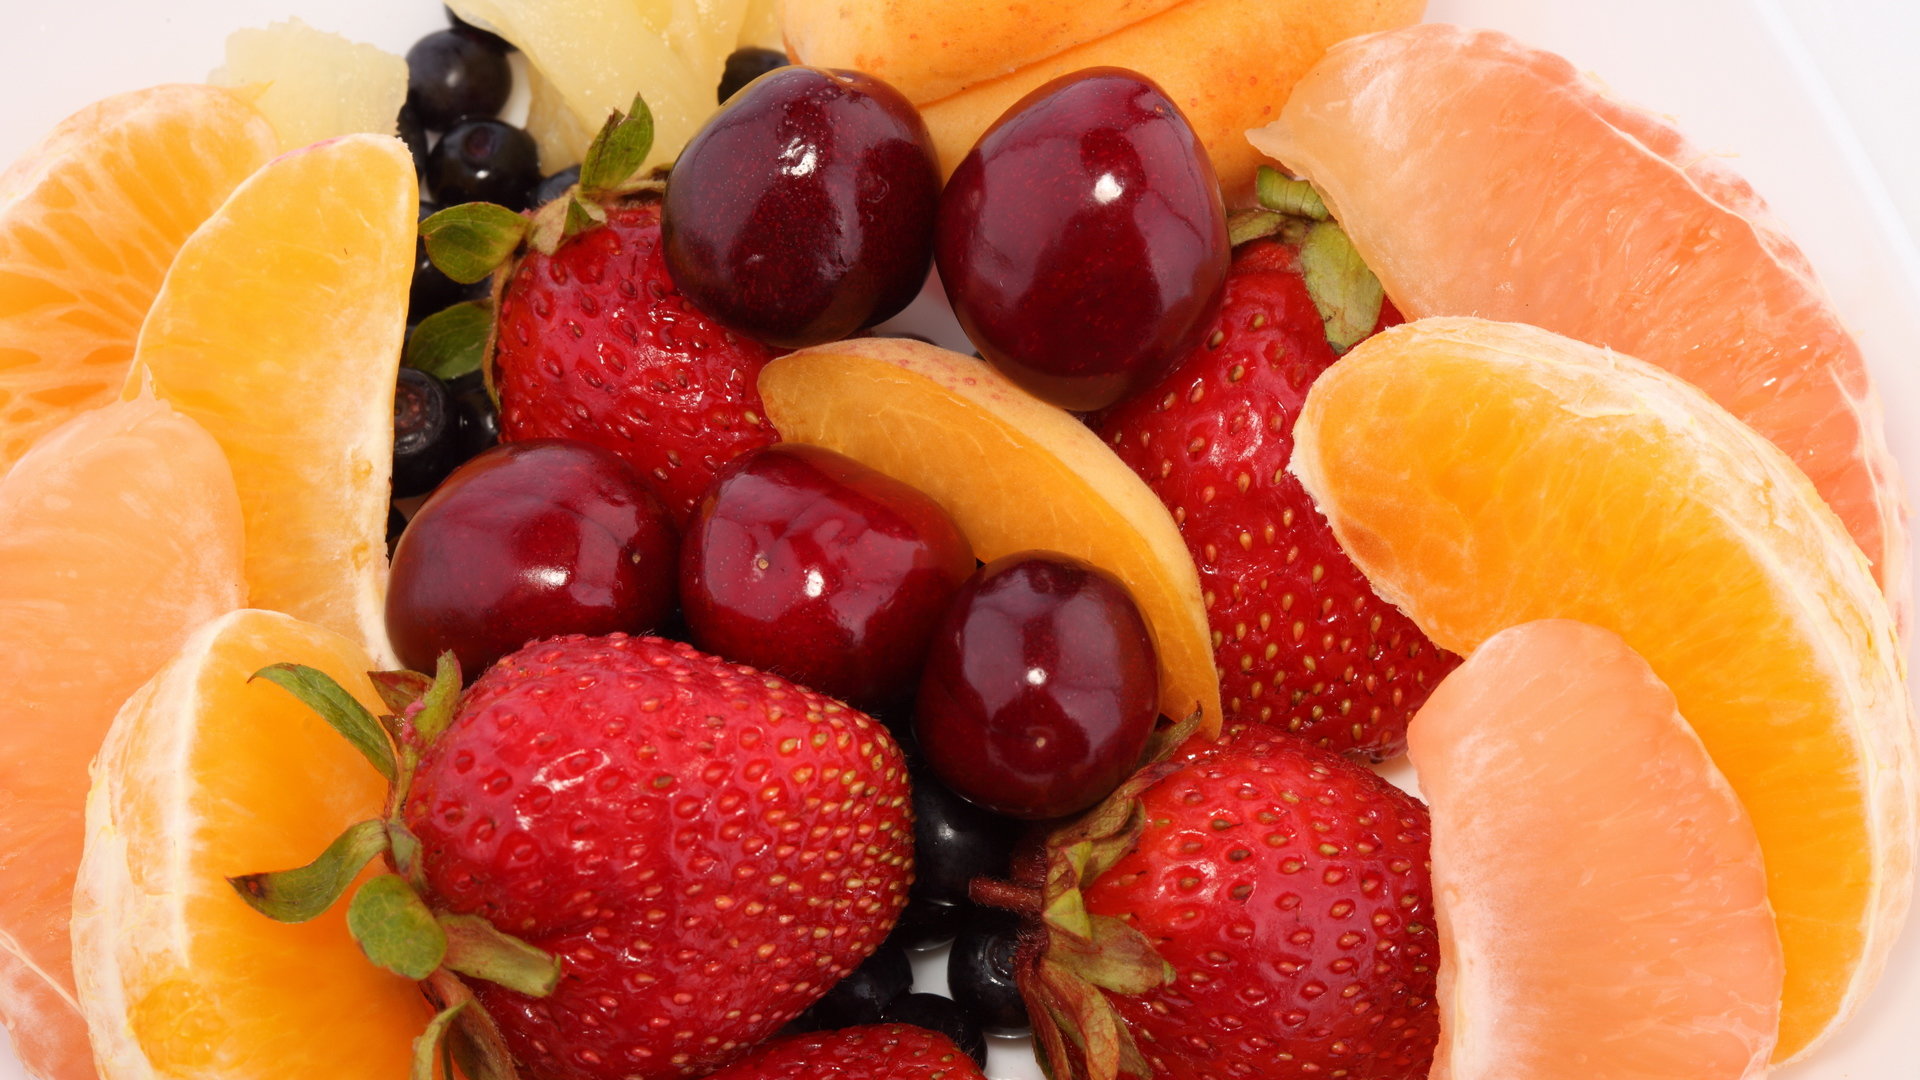 Download 1080p Fruit PC background ID:326163 for free